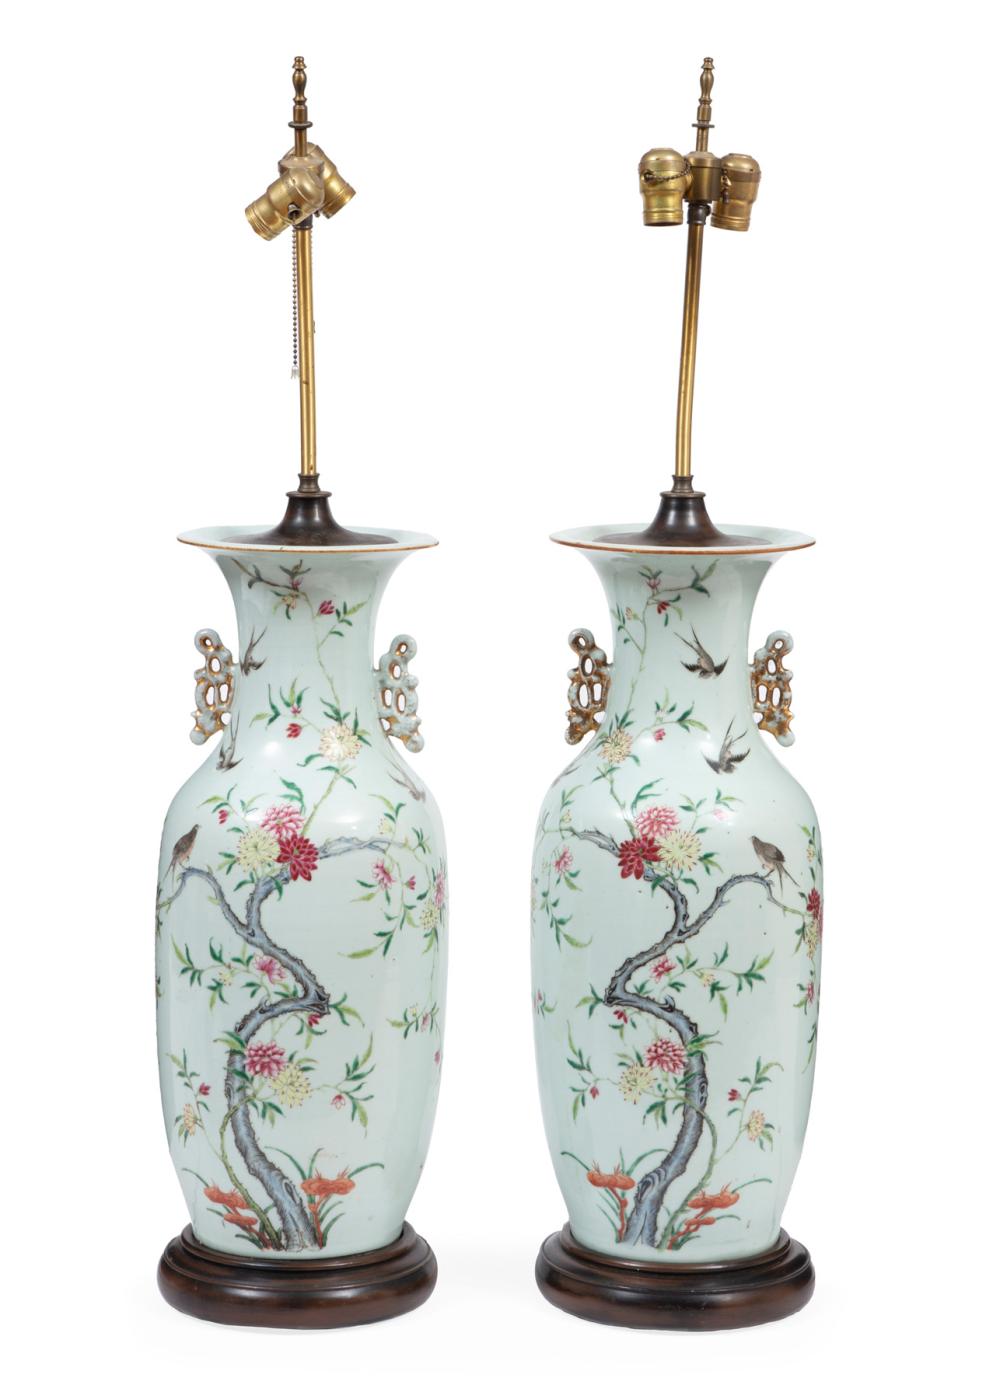 PAIR OF CHINESE FAMILLE ROSE PORCELAIN 2ded1d